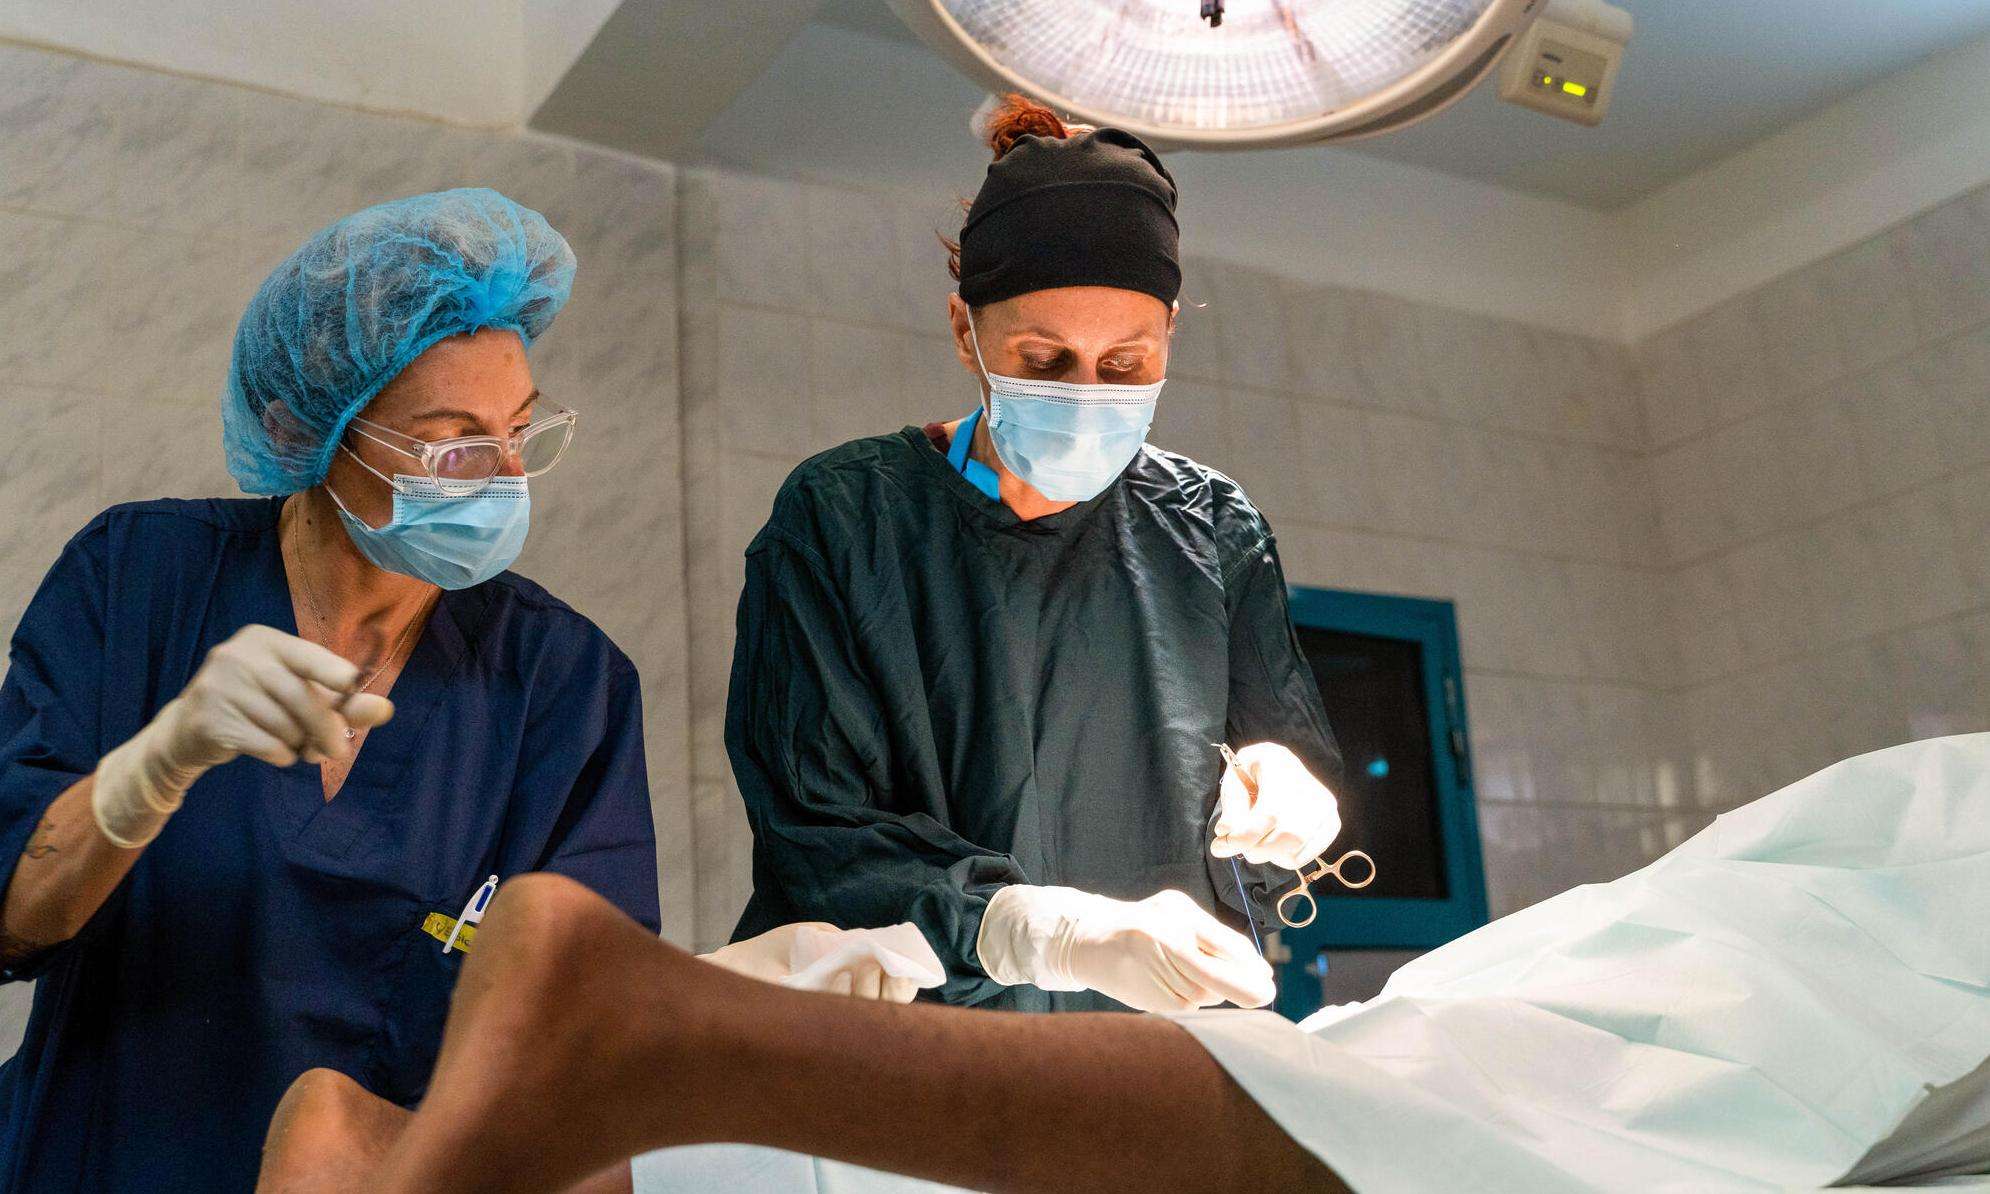 MSF nurse and surgeon operate on a patient at Bashair Teaching Hospital in Khartoum, Sudan, during the conflict.